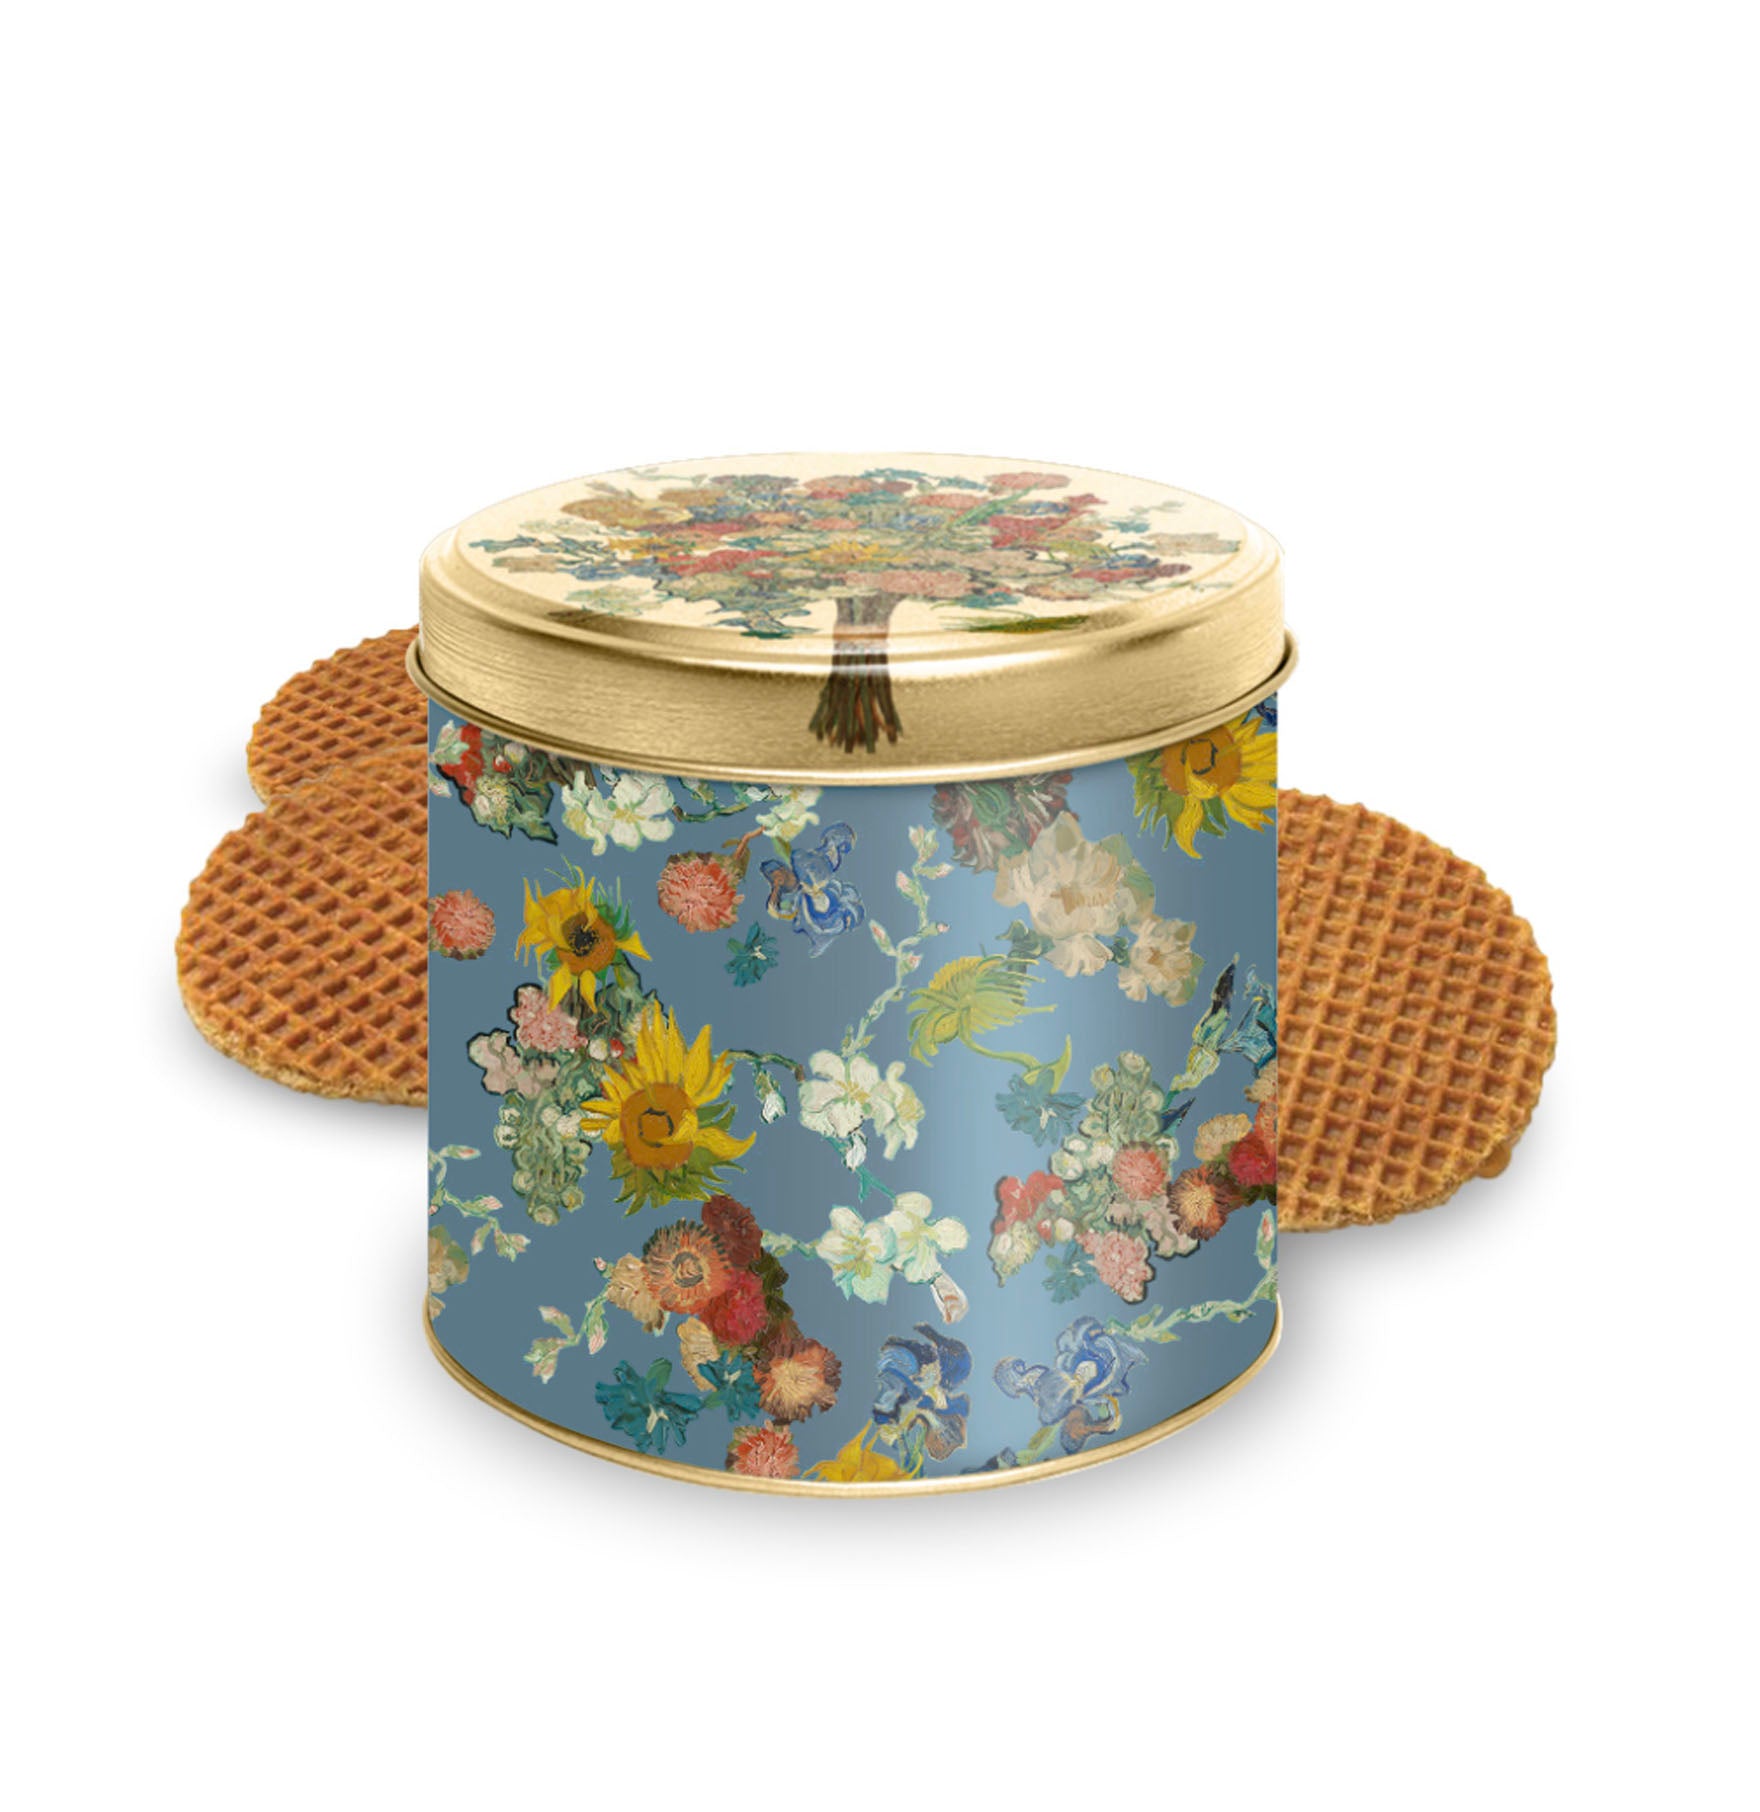 Shop Now! VAN GOGH MUSEUM 50 YEARS, Storage Tin with Syrup Waffles, Luxury Thermo Bottle Gift Set